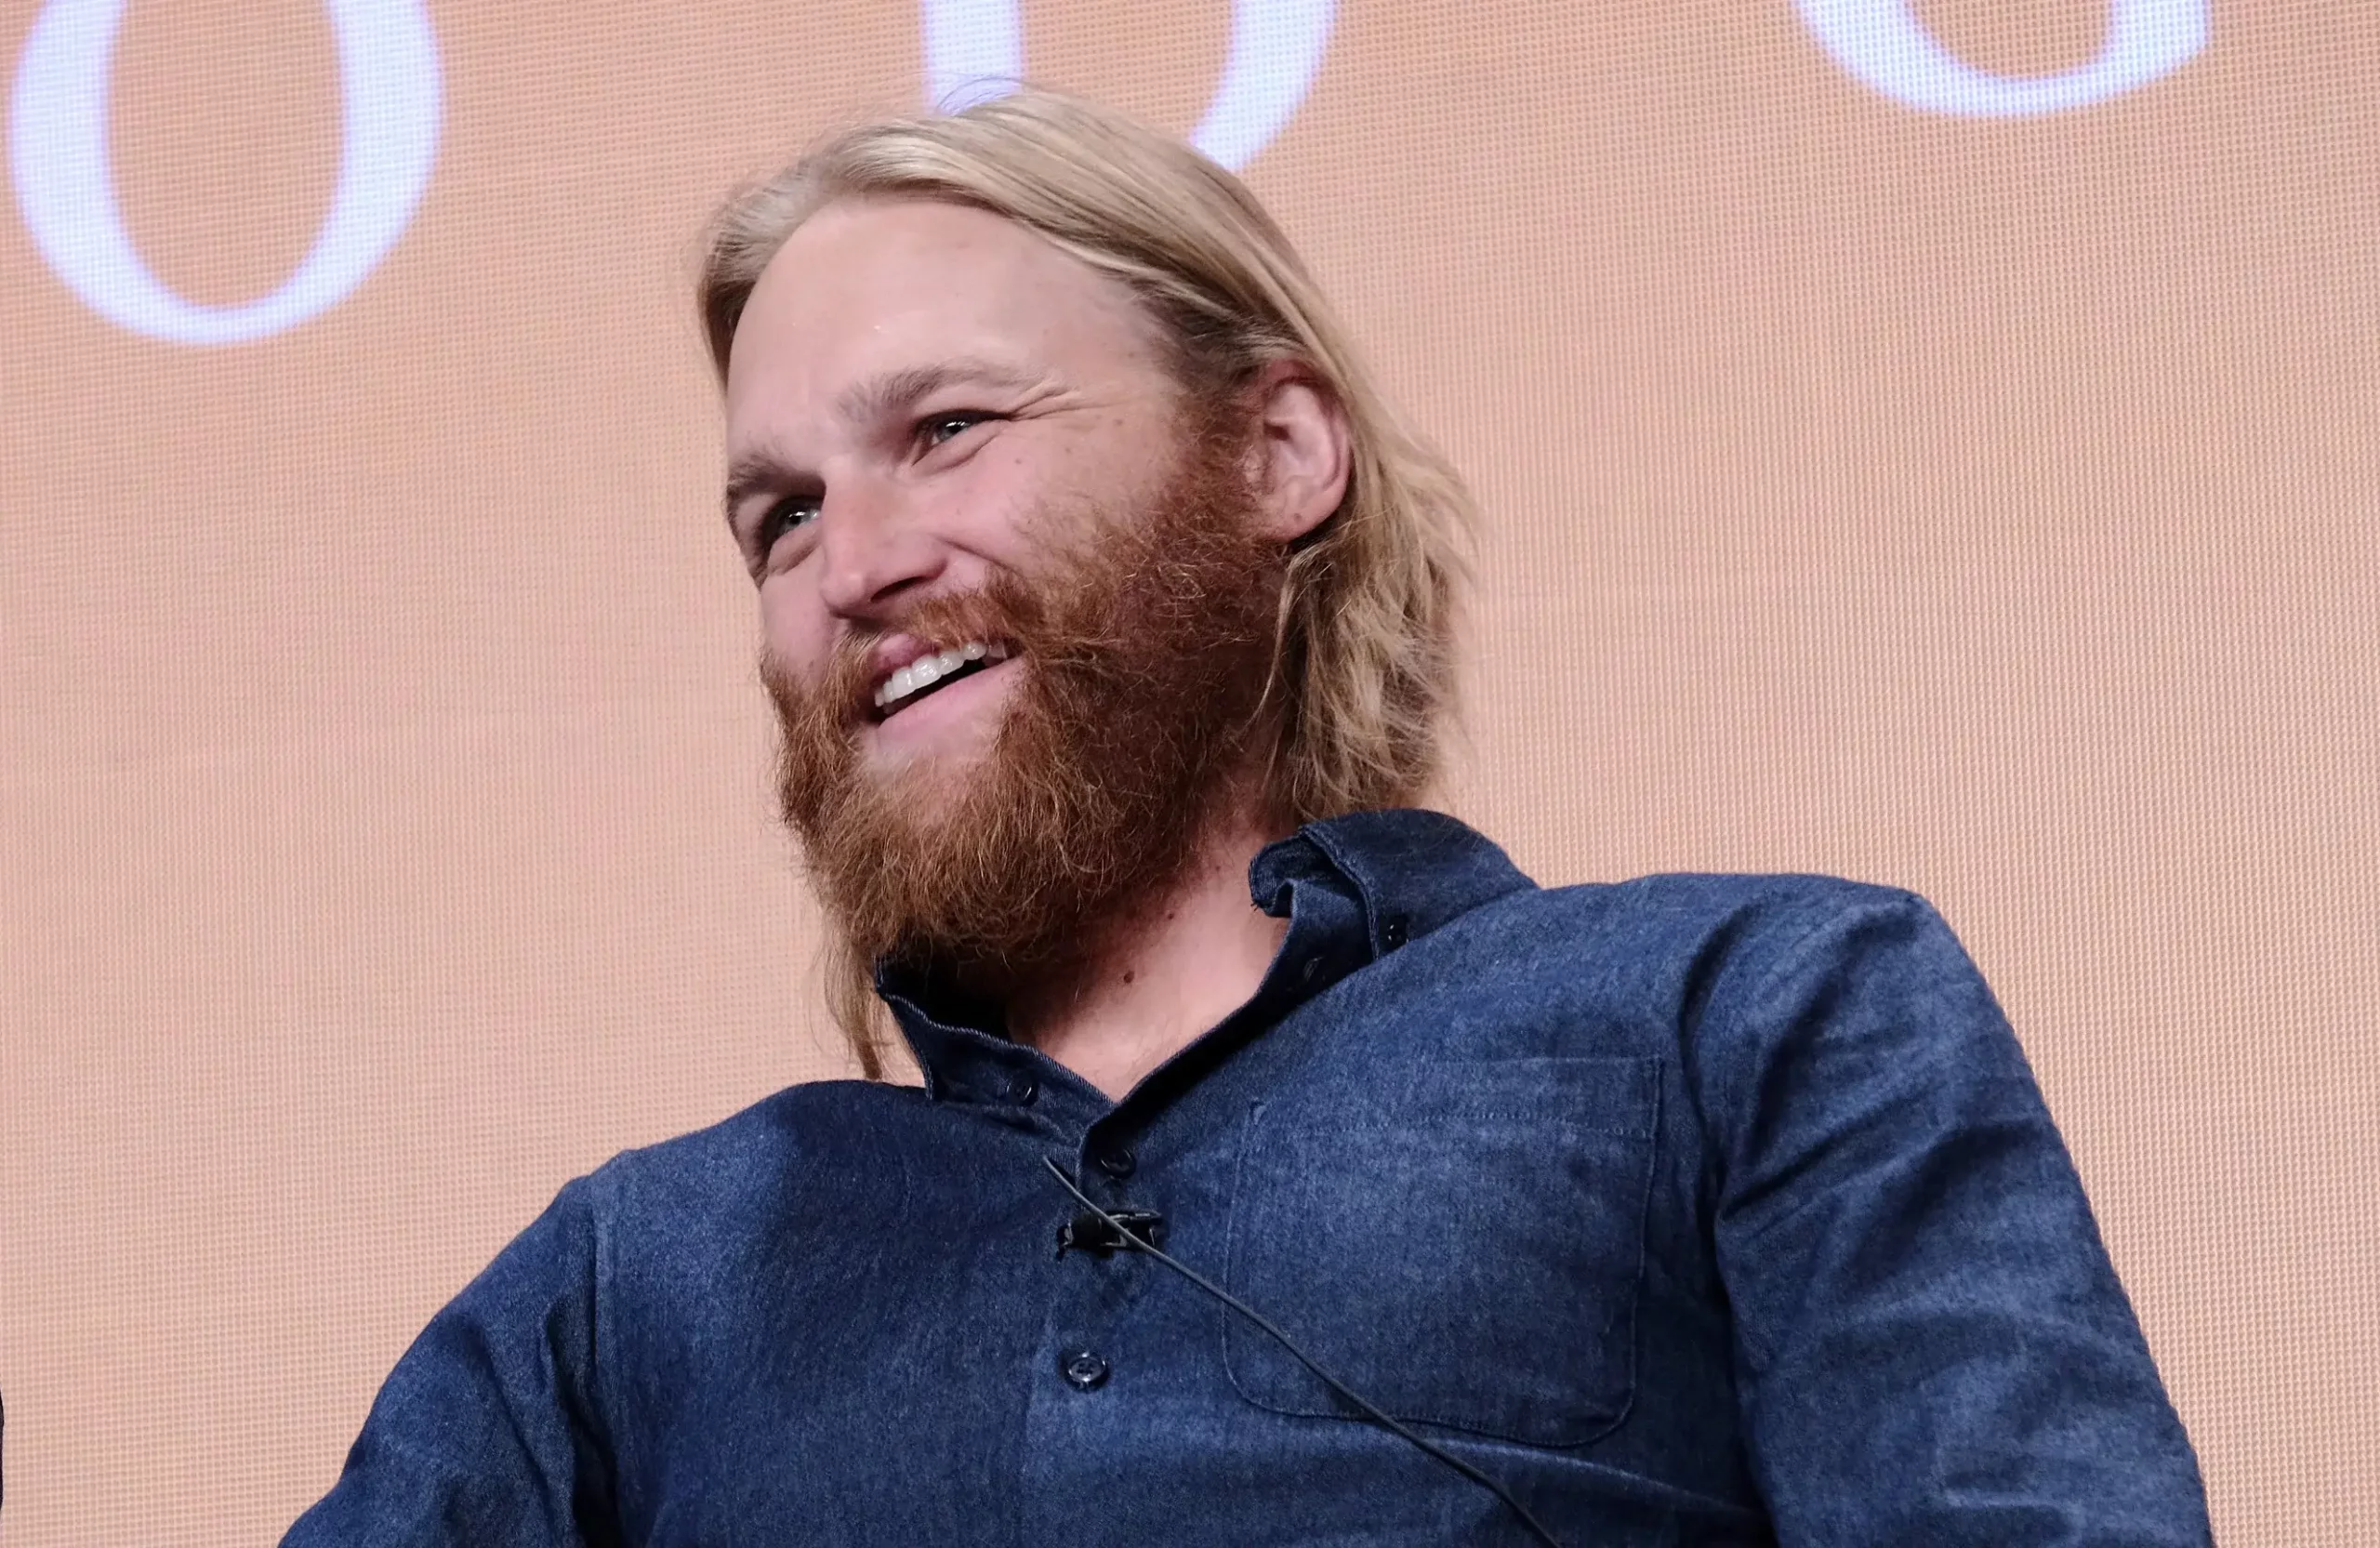 American actor and former hockey player, Wyatt Russell